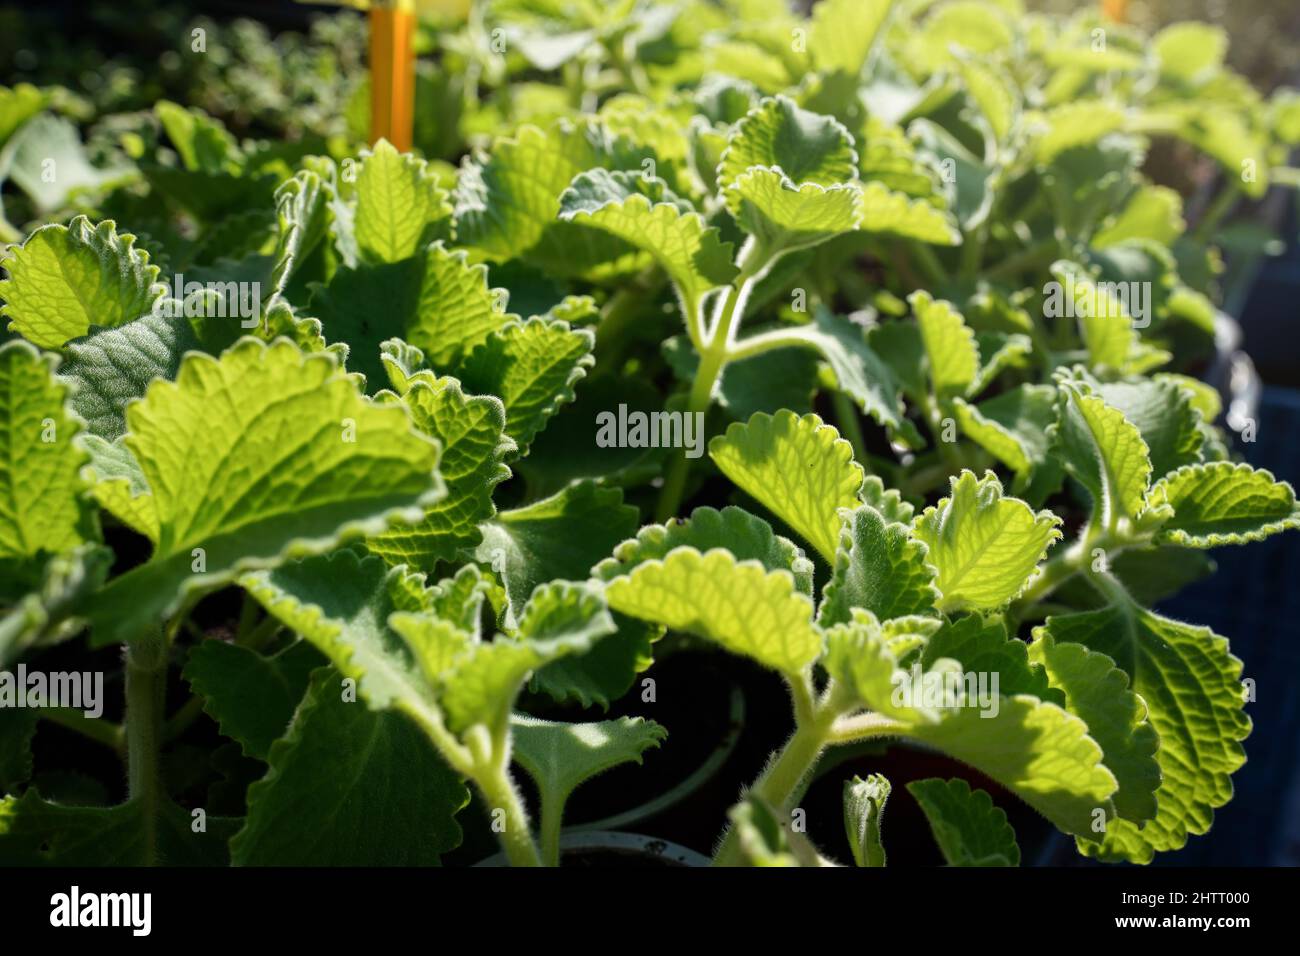 Sun shines on country borage indian mint - Coleus amboinicus - herbs displayed on street food market, closeup detail Stock Photo